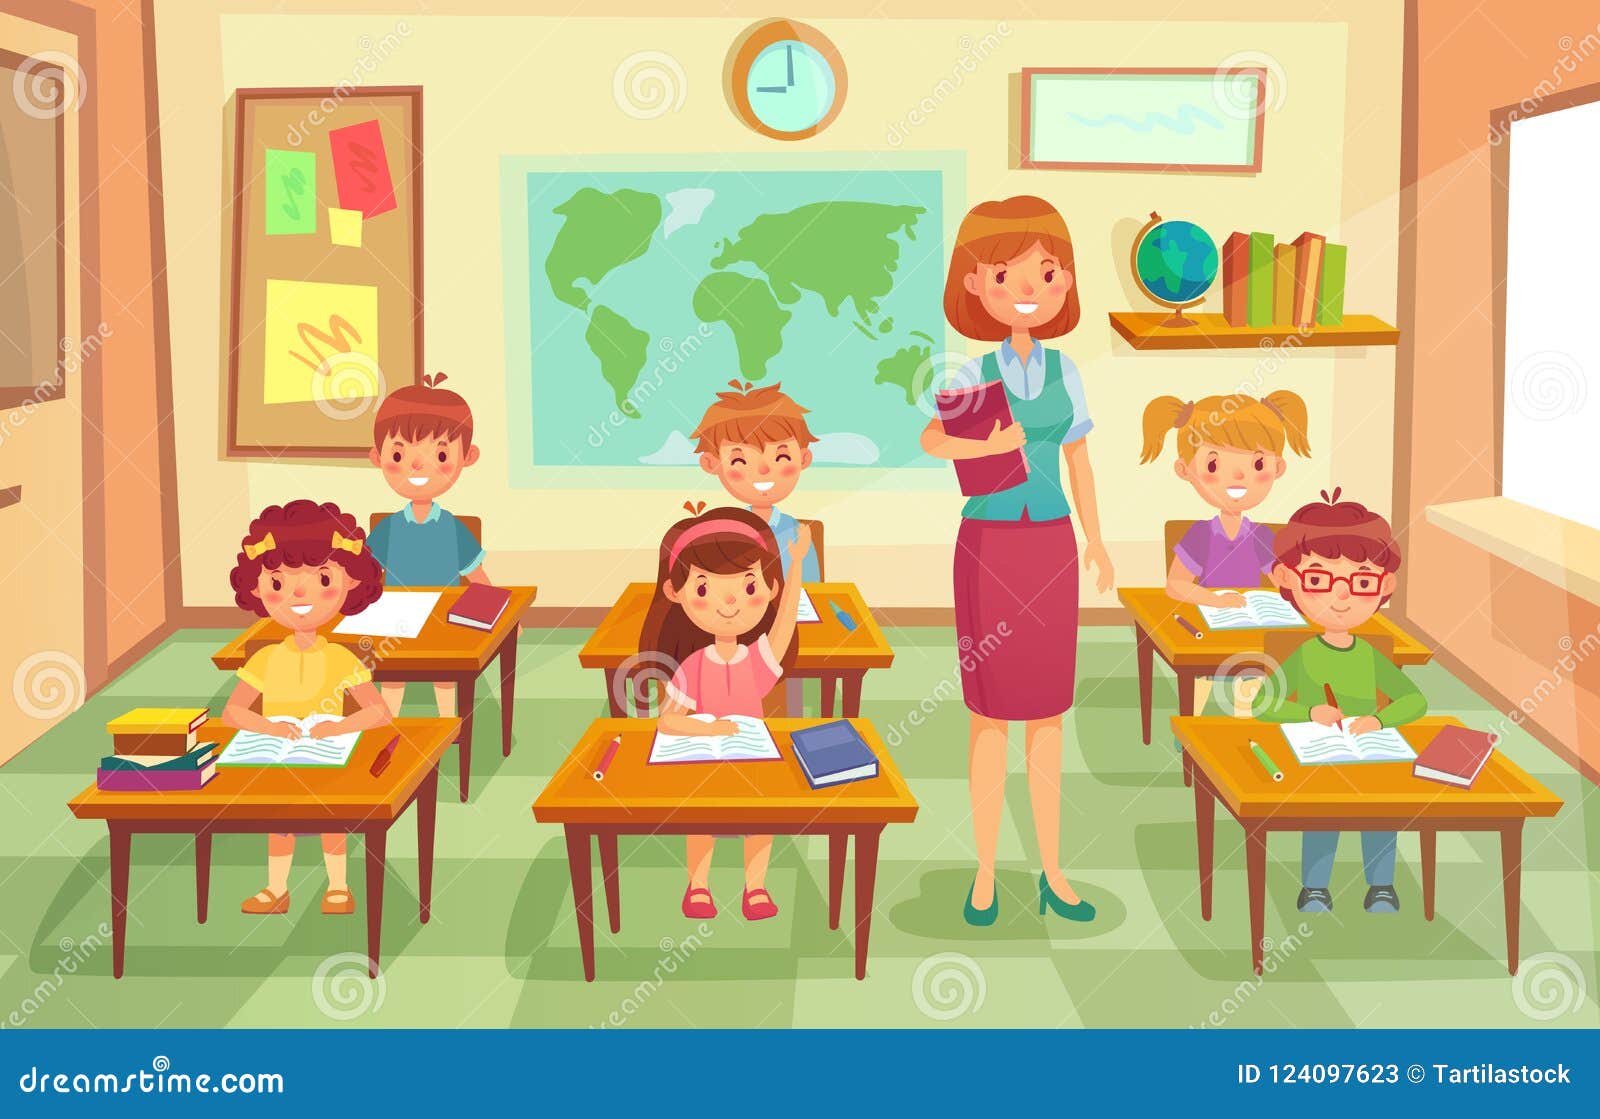 pupils and teacher in classroom. school pedagogue teach lesson to pupil kids. schools lessons at class cartoon 